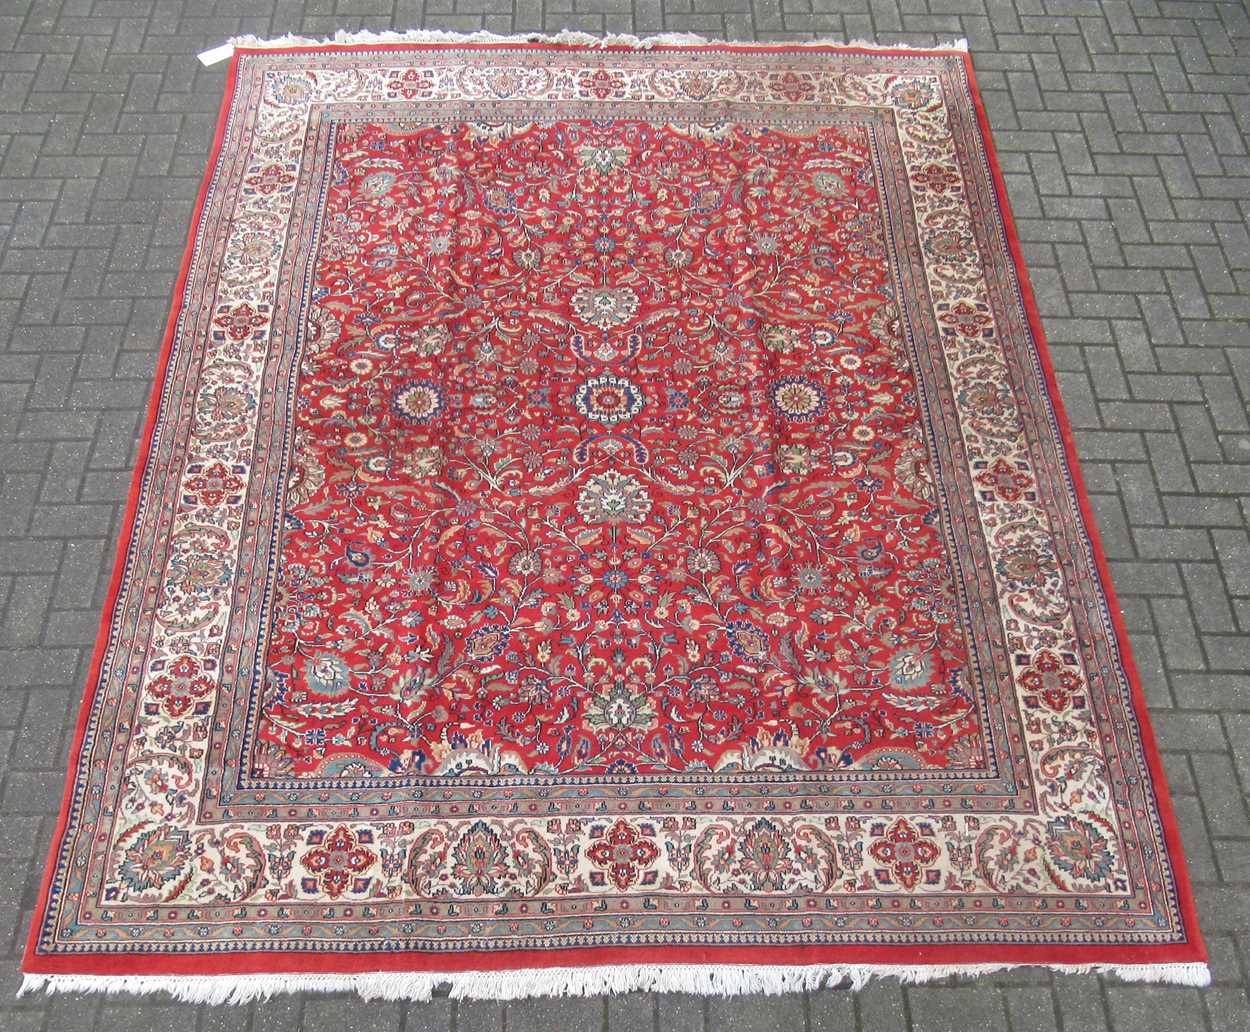 A mahal rug with a red ground colour 304 x 242 cm